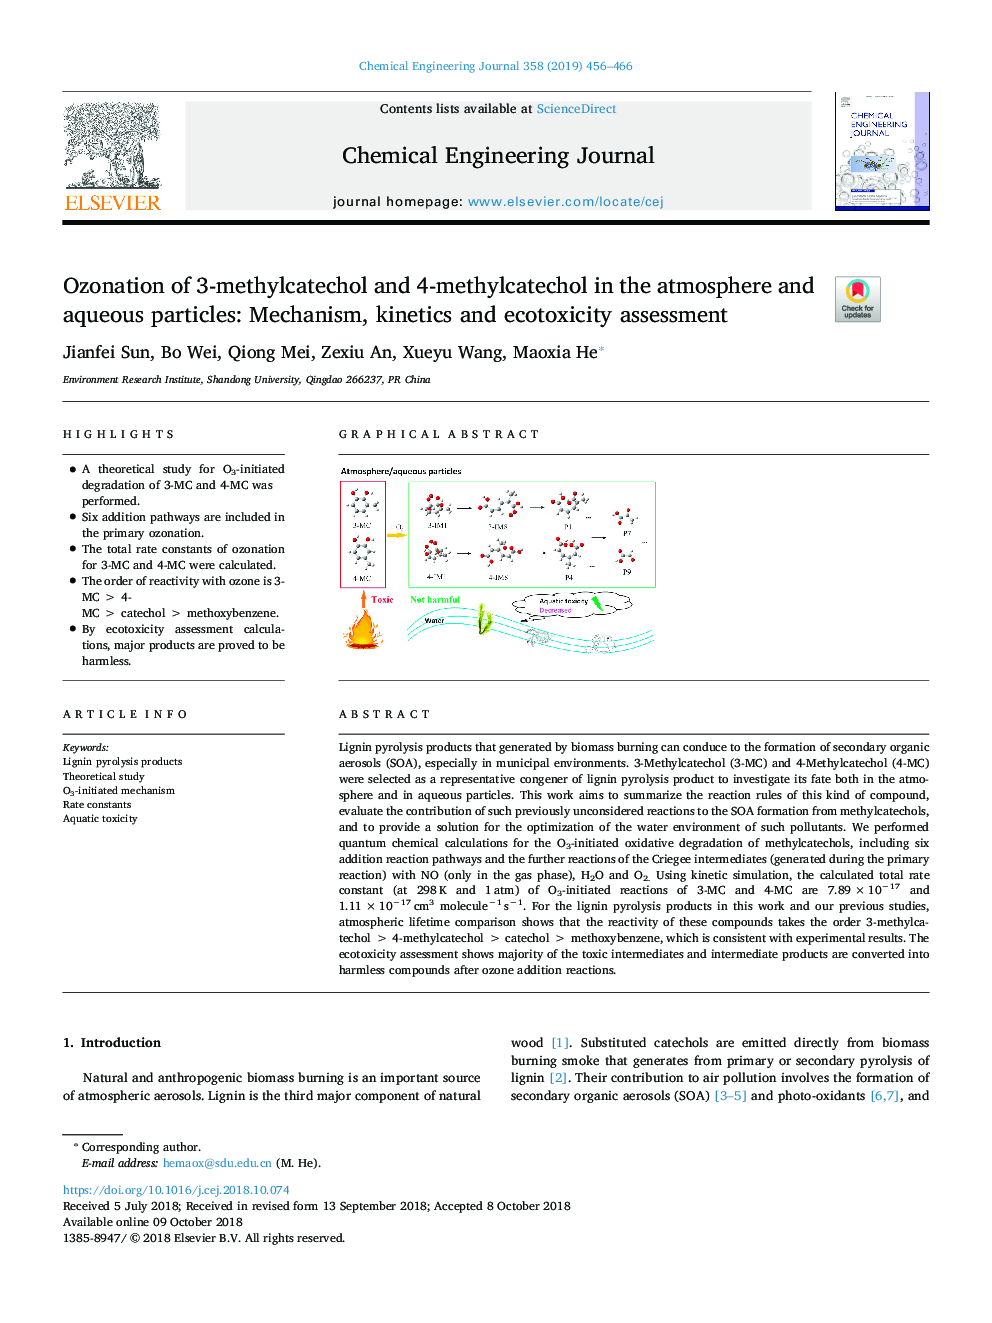 Ozonation of 3-methylcatechol and 4-methylcatechol in the atmosphere and aqueous particles: Mechanism, kinetics and ecotoxicity assessment